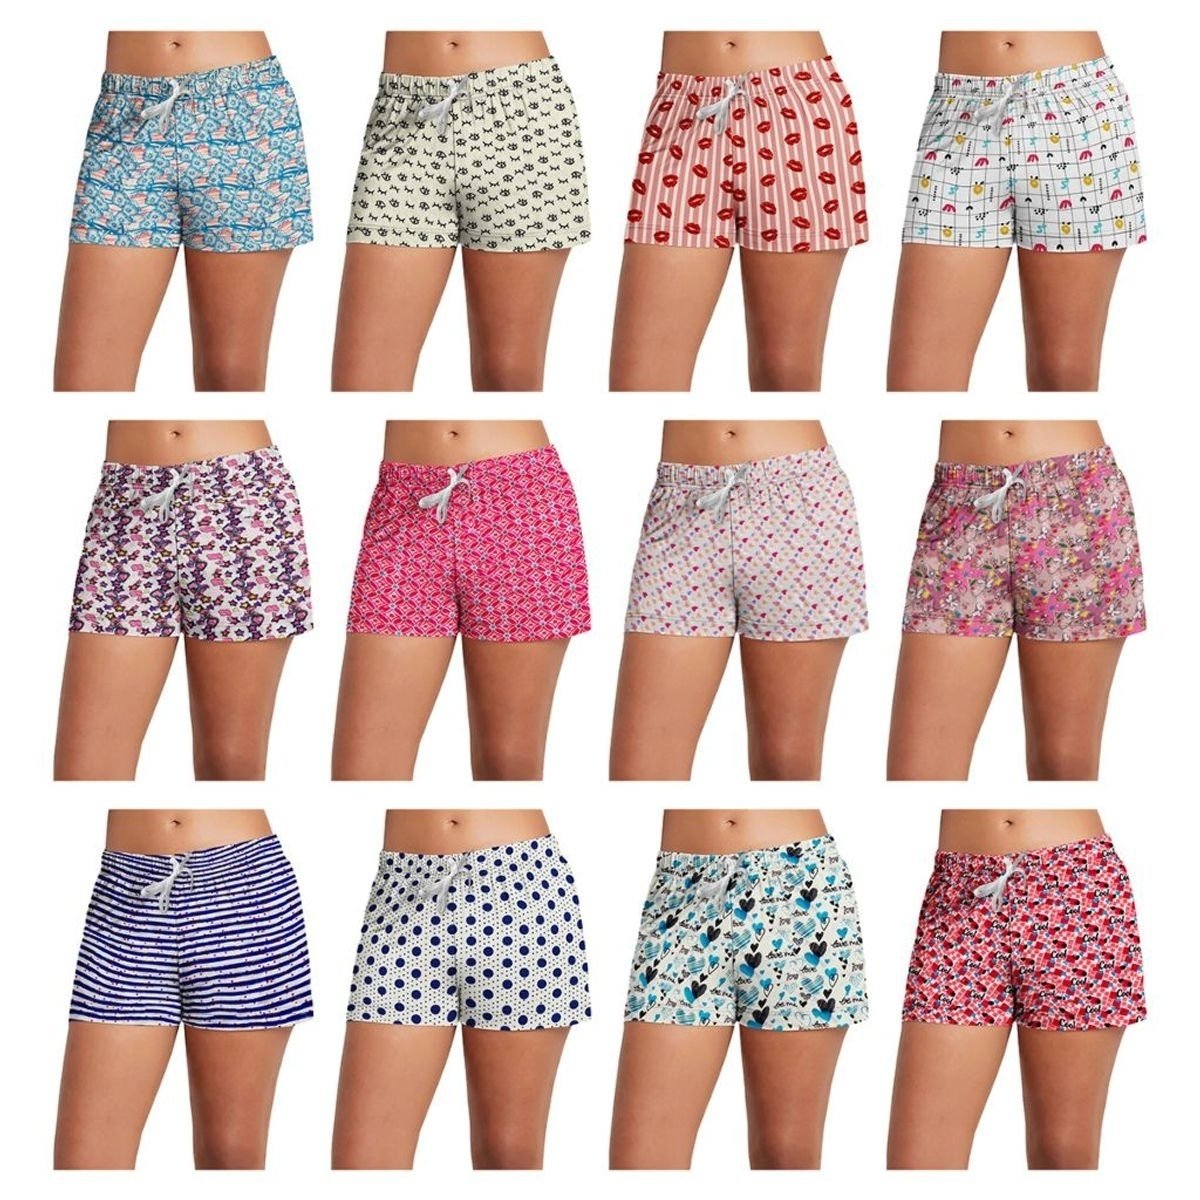 5-Pack: Women's Super-Soft Lightweight Fun Printed Comfy Lounge Bottom Pajama Shorts W/ Drawstring - Small, Shapes